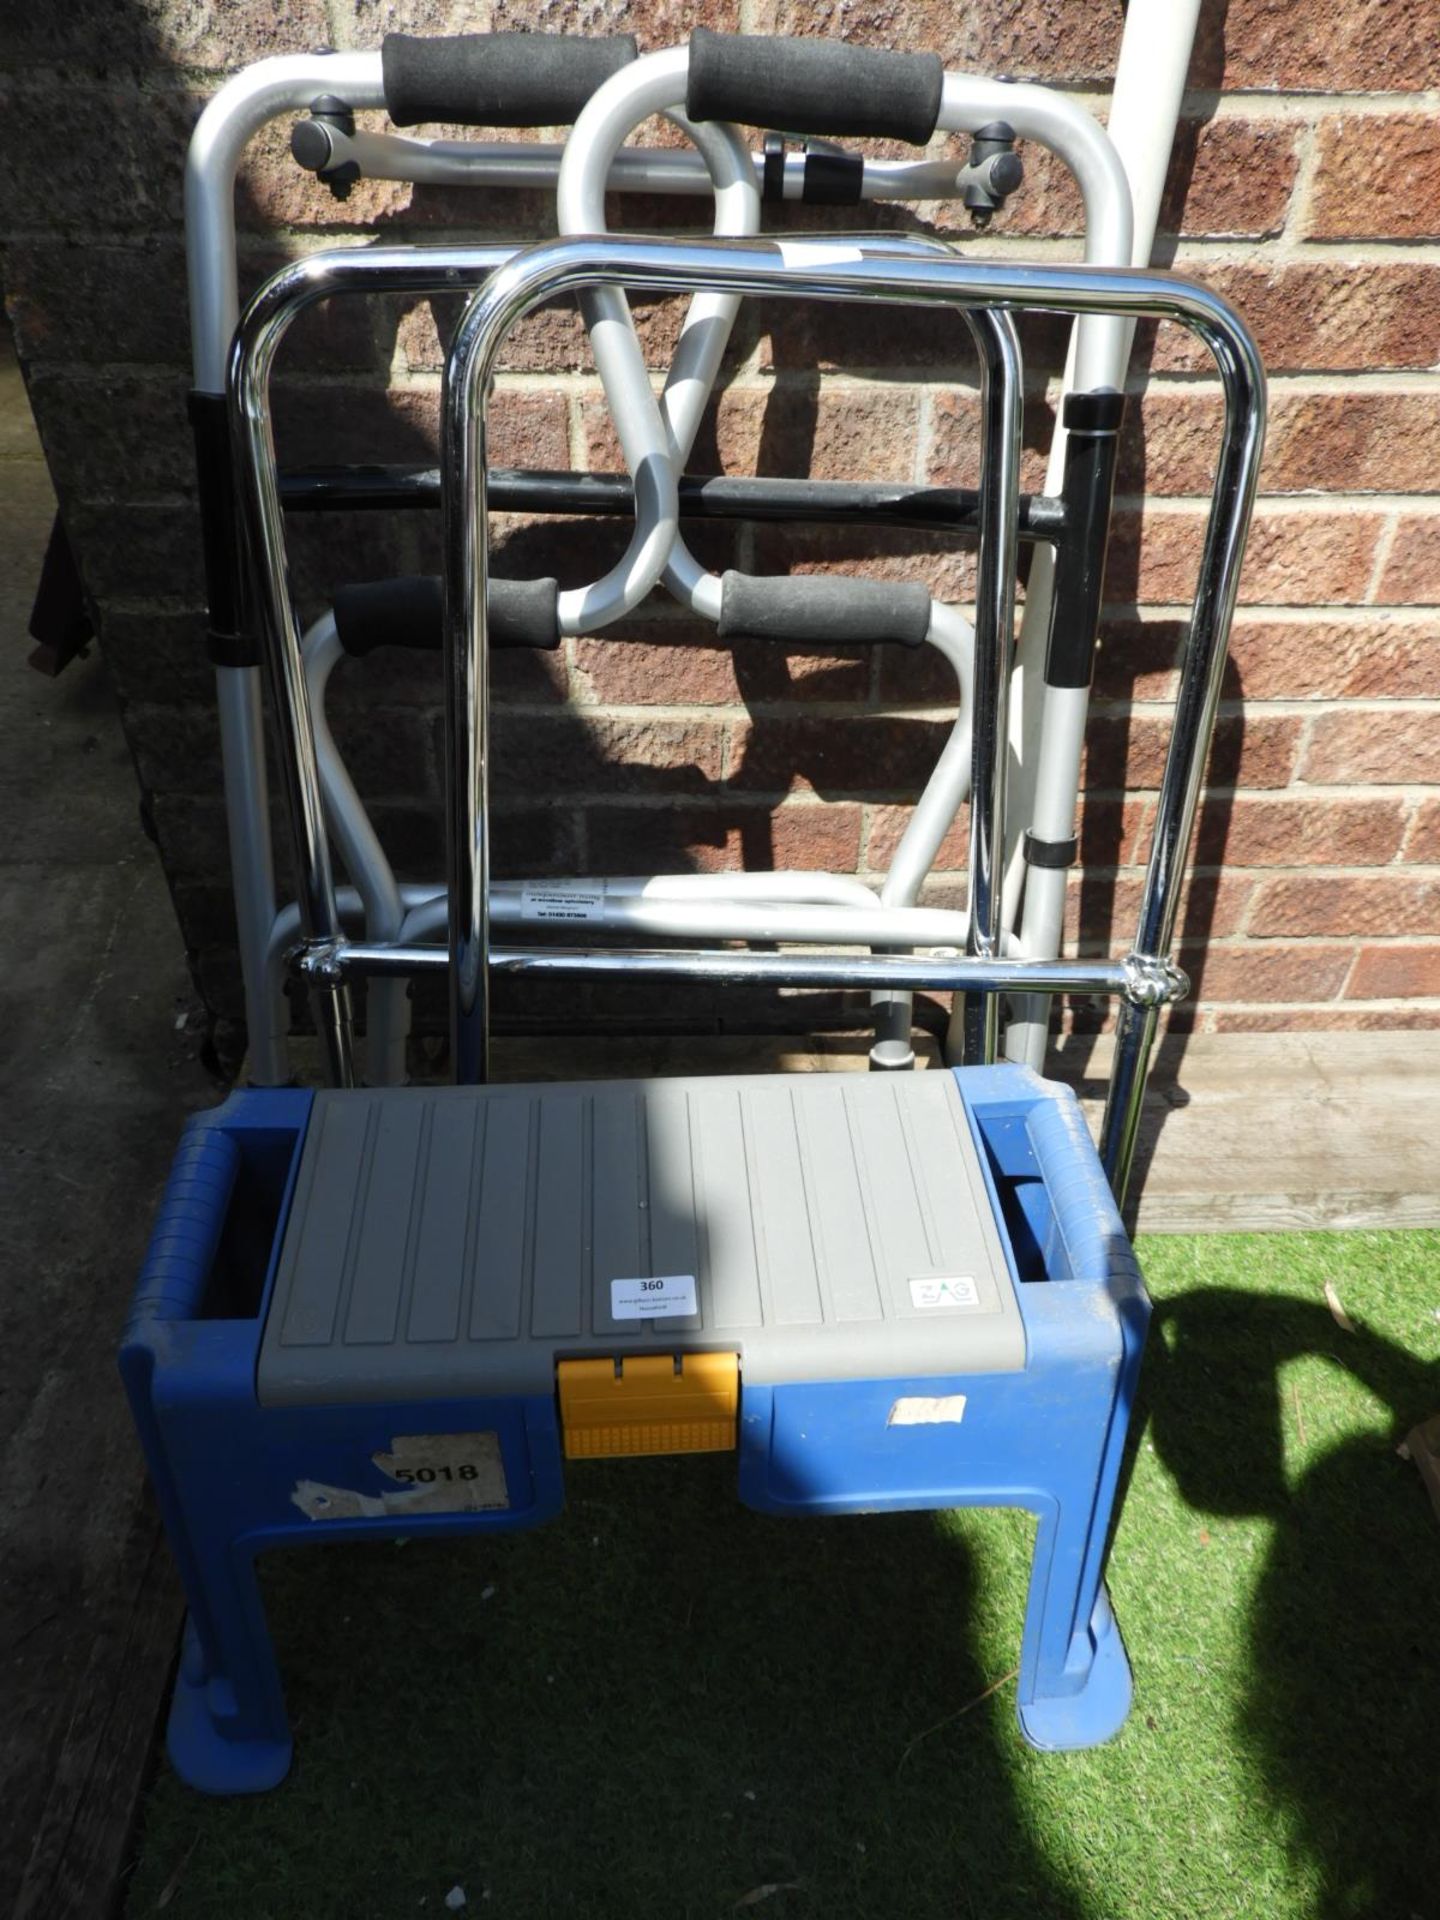 Two Mobility Aids and a Garden Kneeler Stool